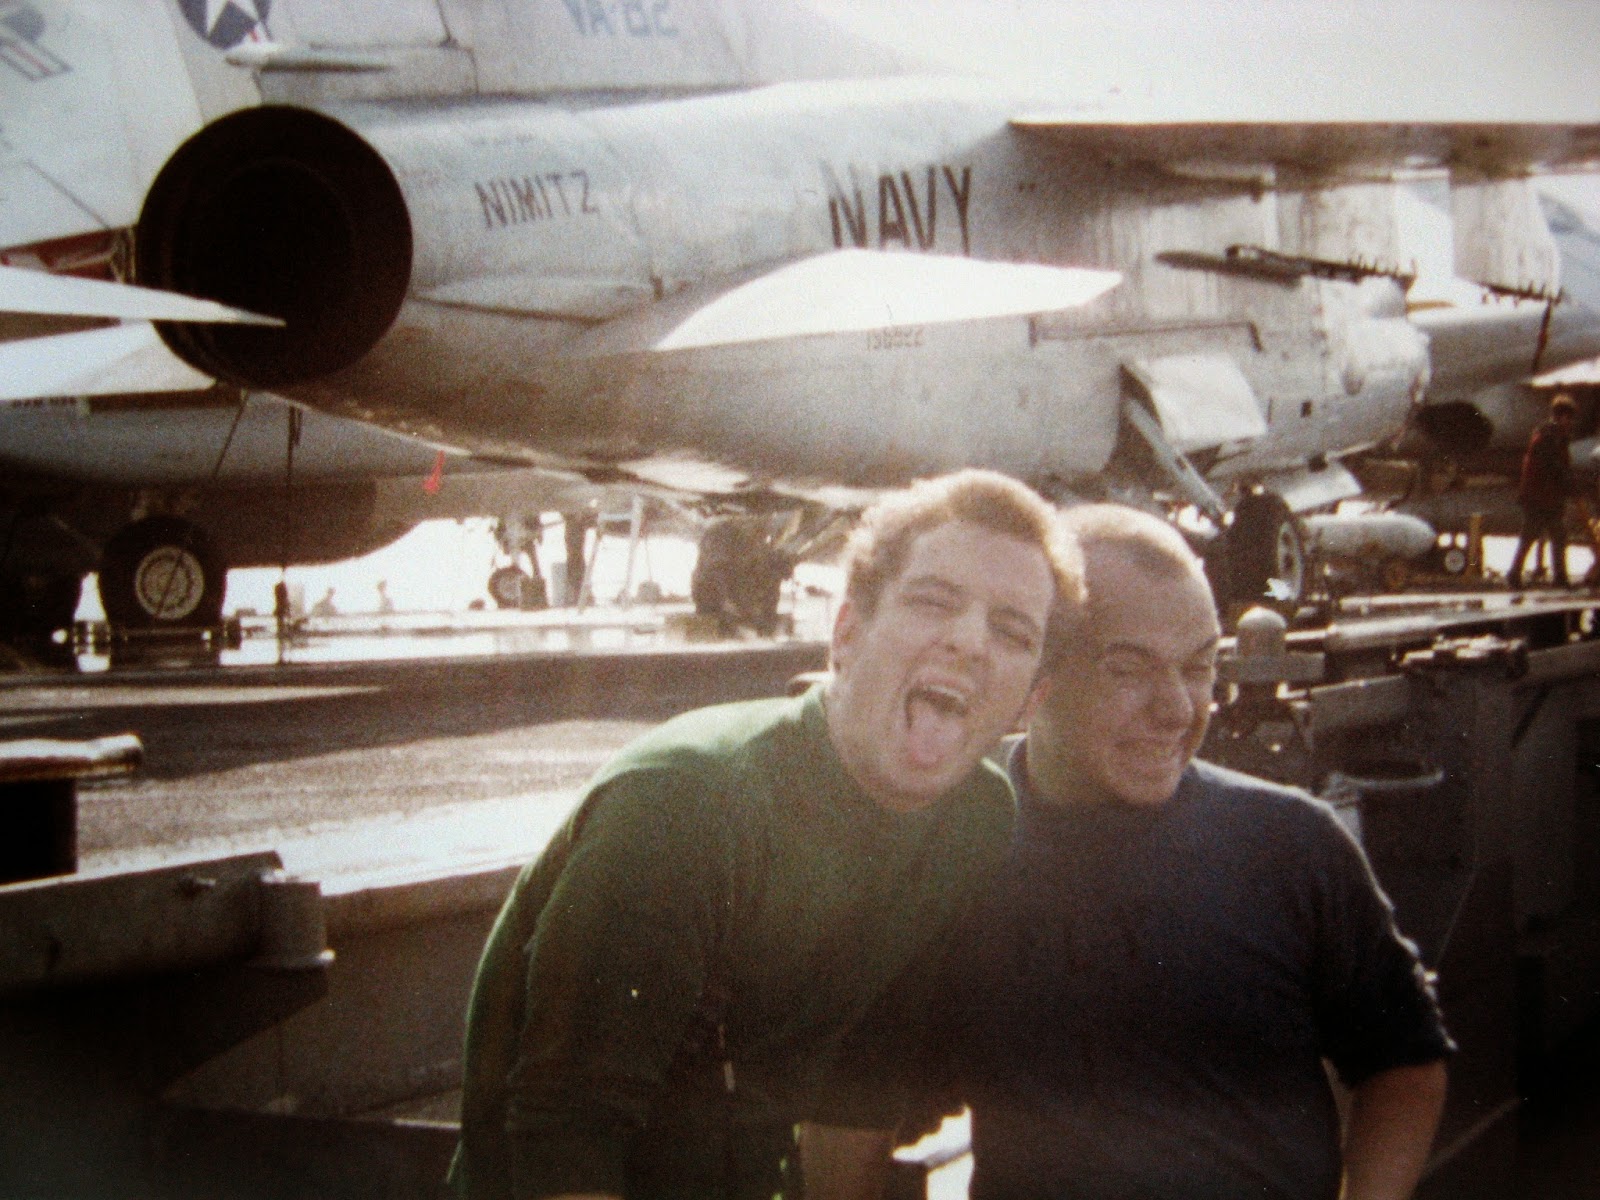 Billy (right) and pal on the Nimitz flight deck 1982/83